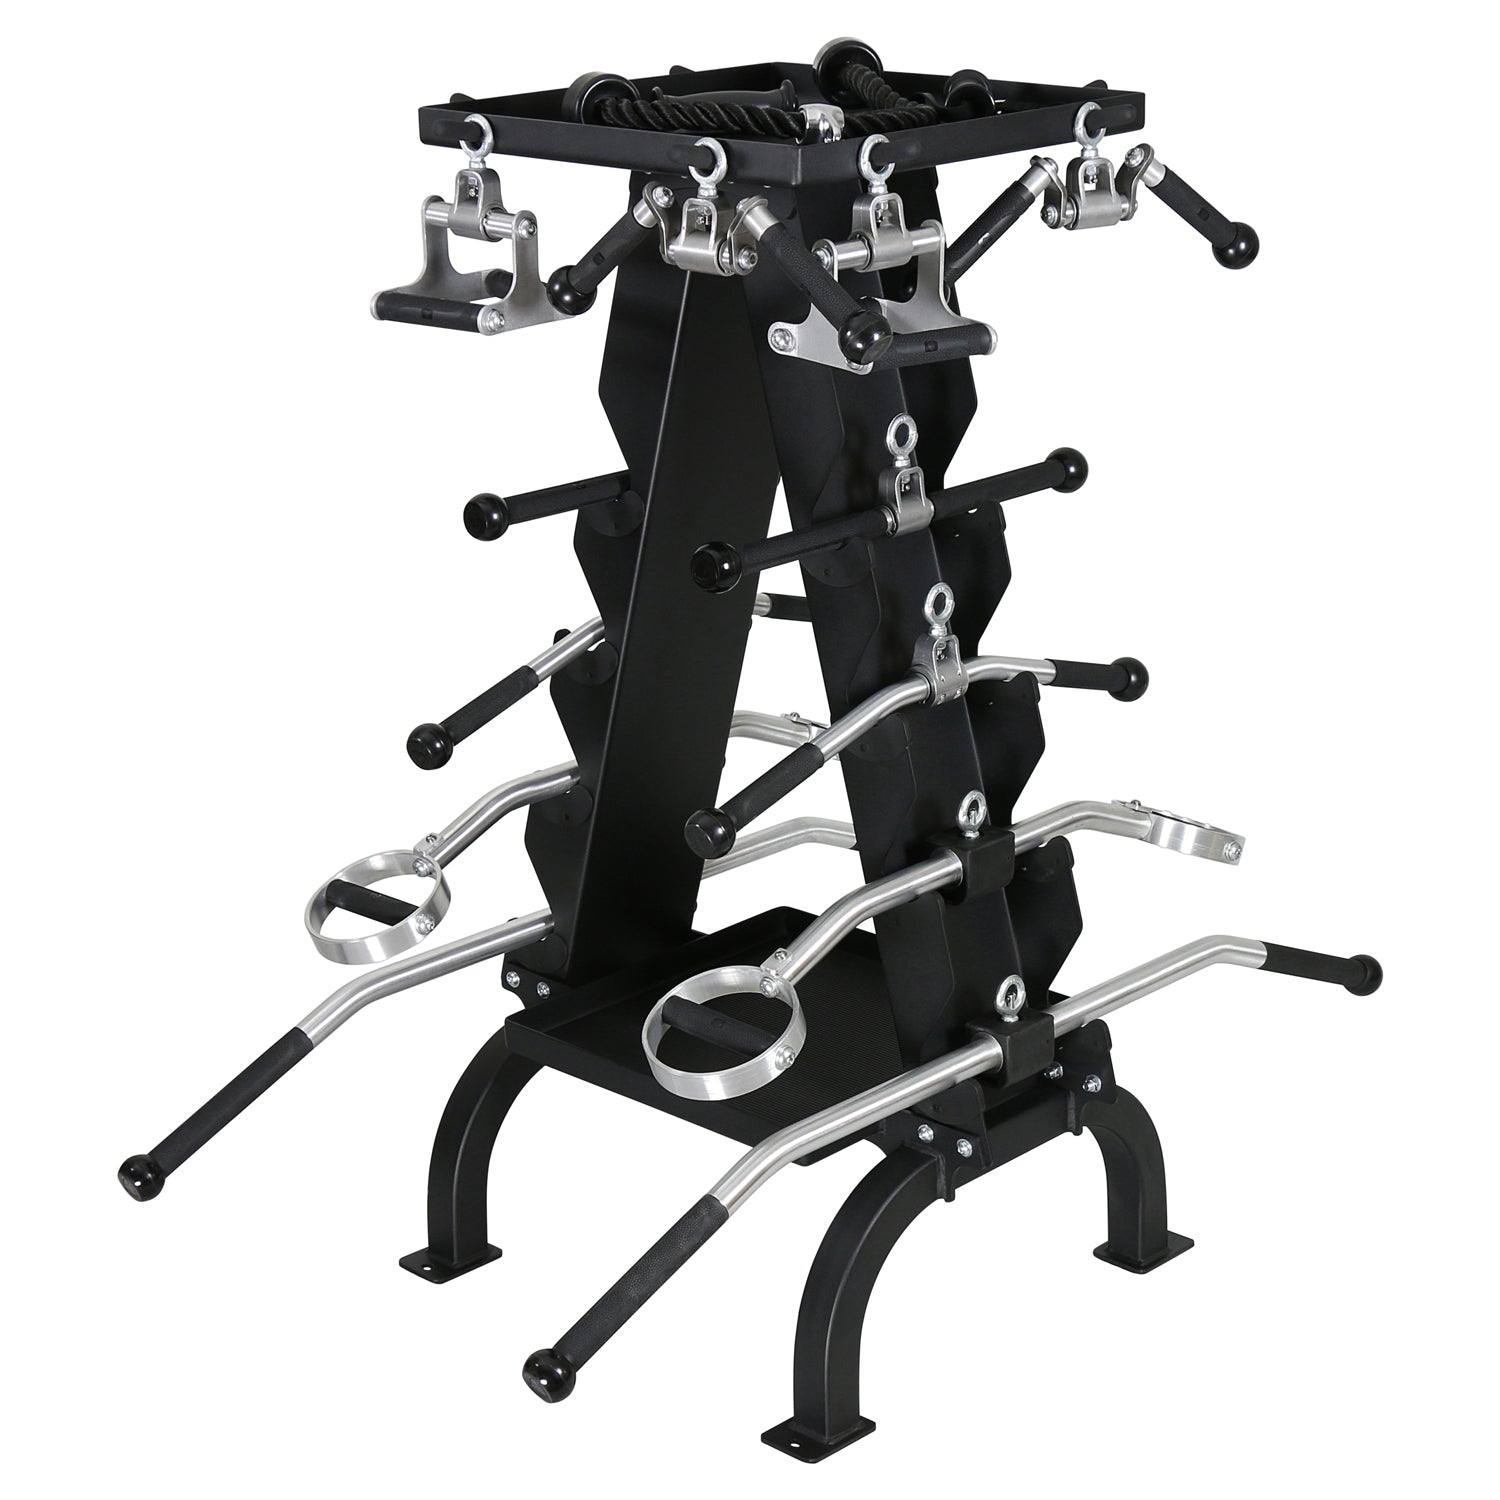 16 Piece Accessory Rack With 2 Rubber Coated Trays - American Barbell Gym Equipment